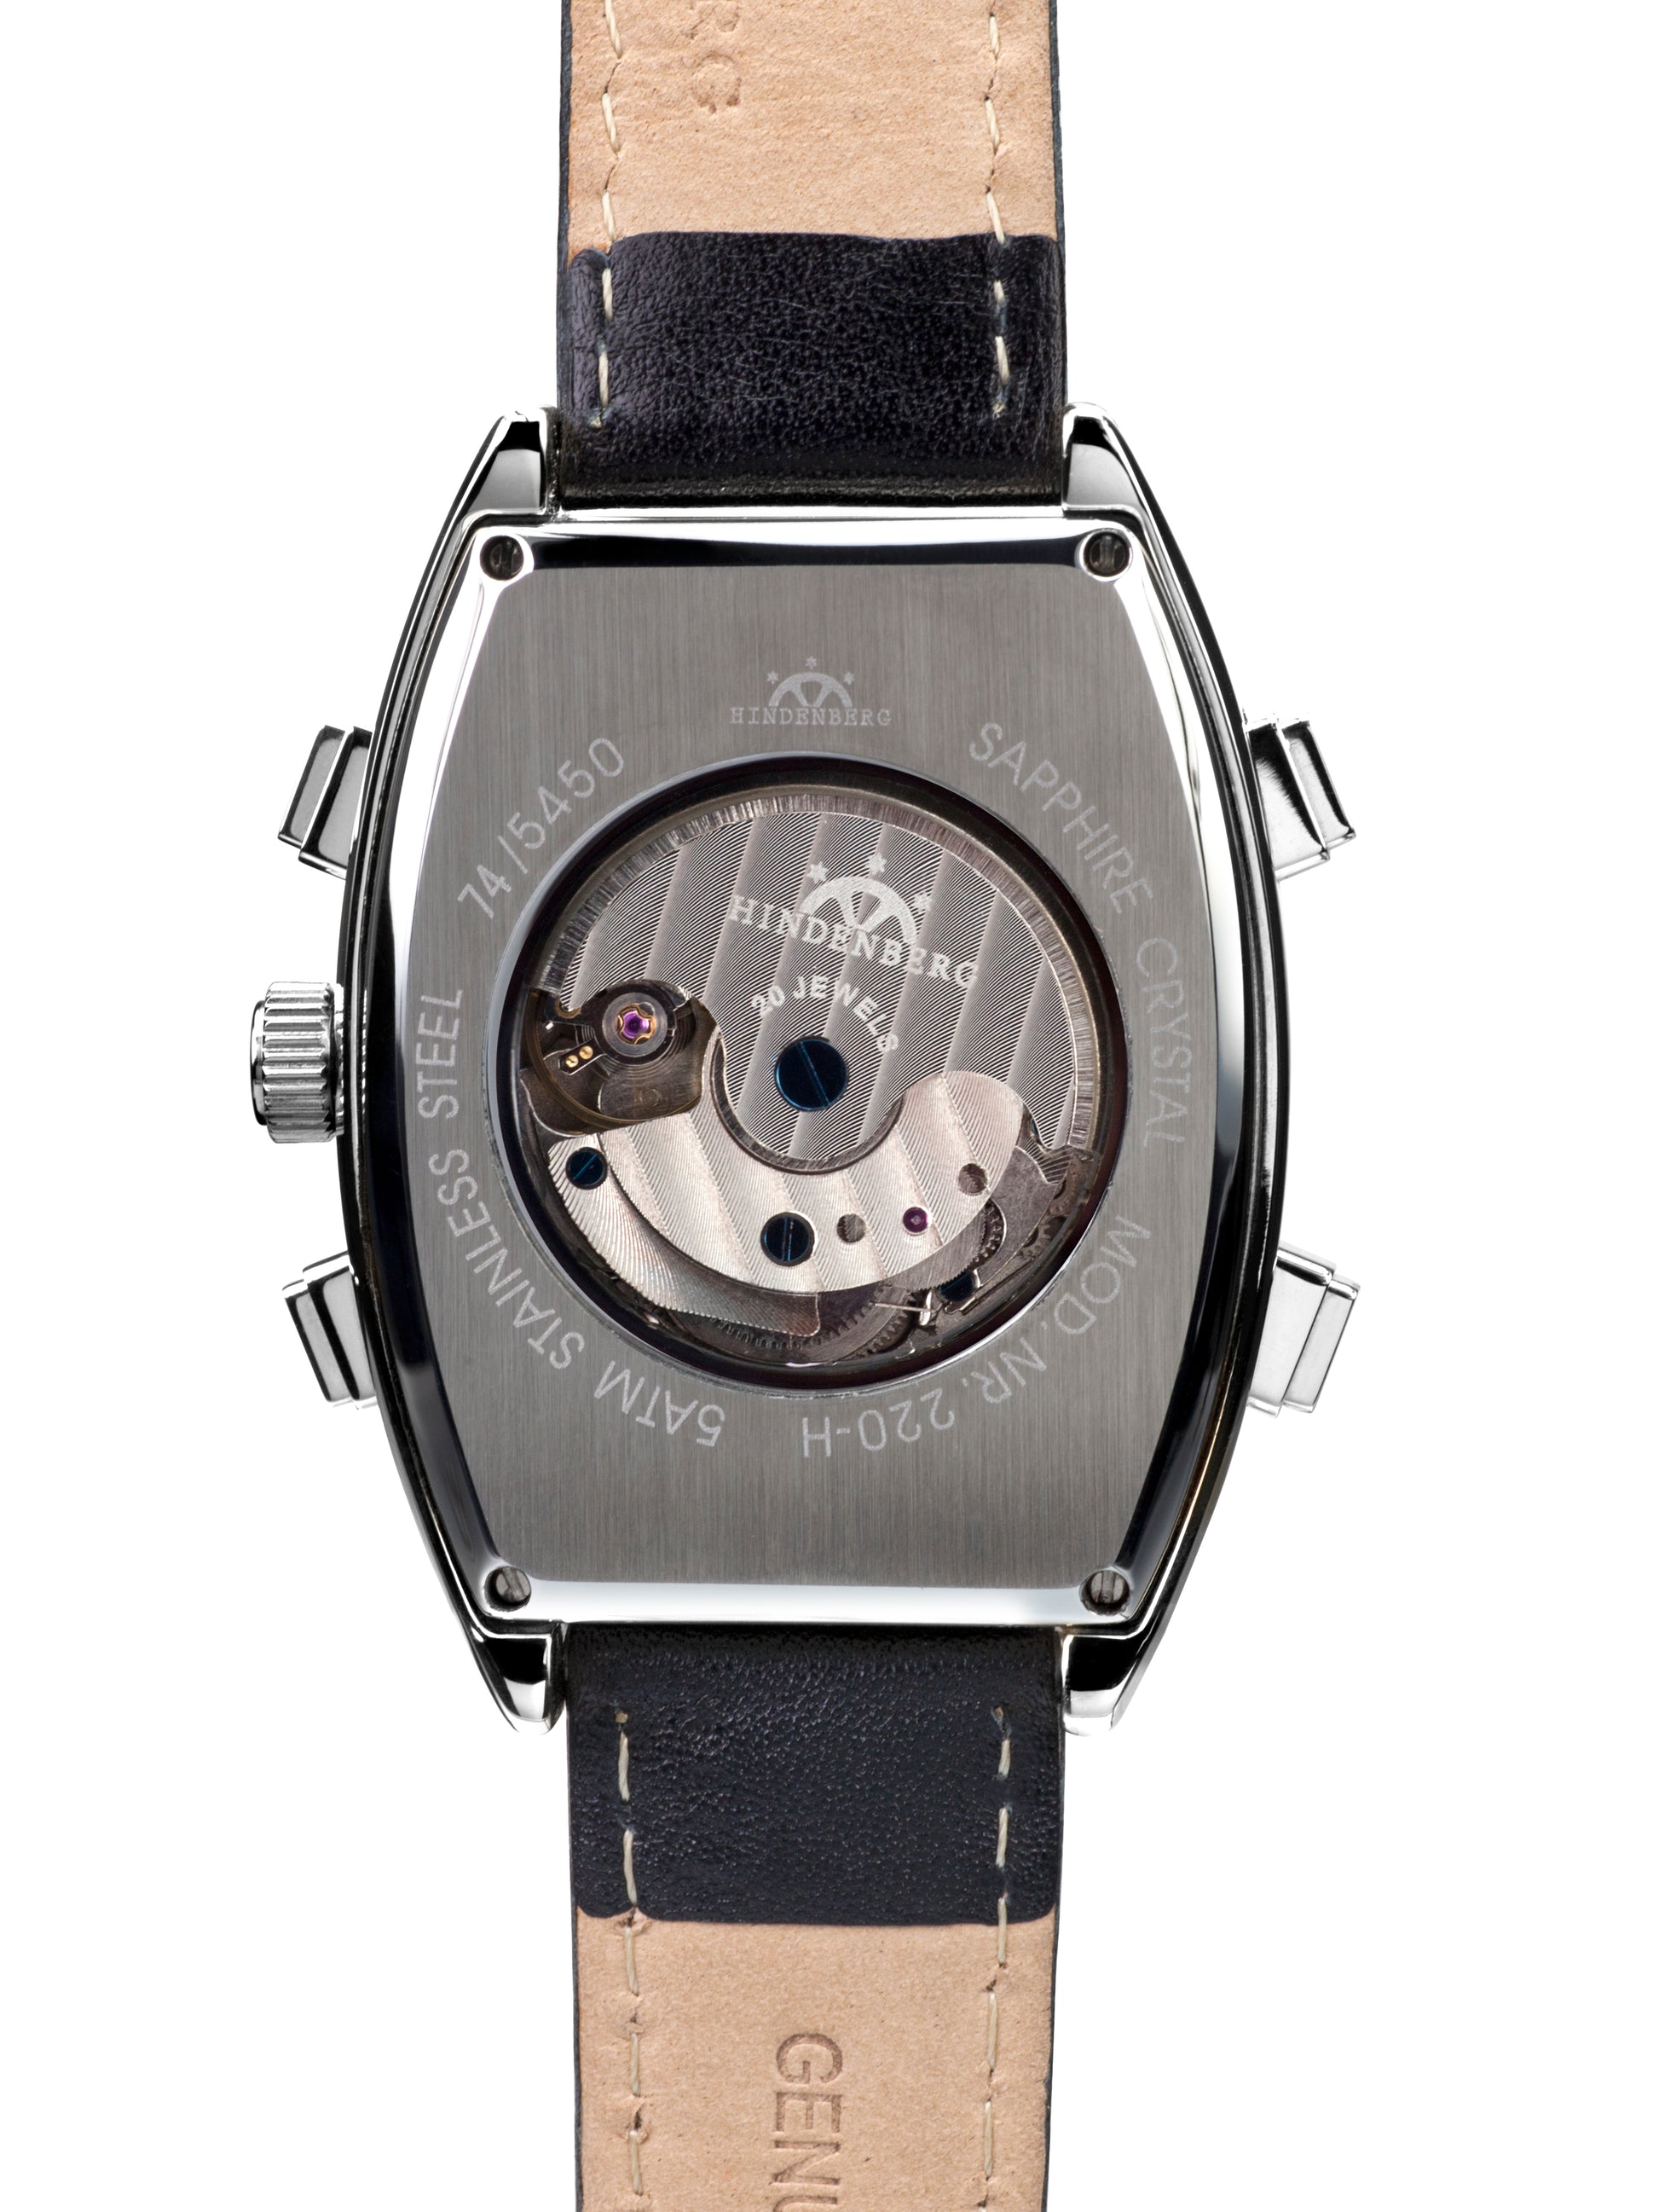 Automatic watches — Emperor — Hindenberg — black